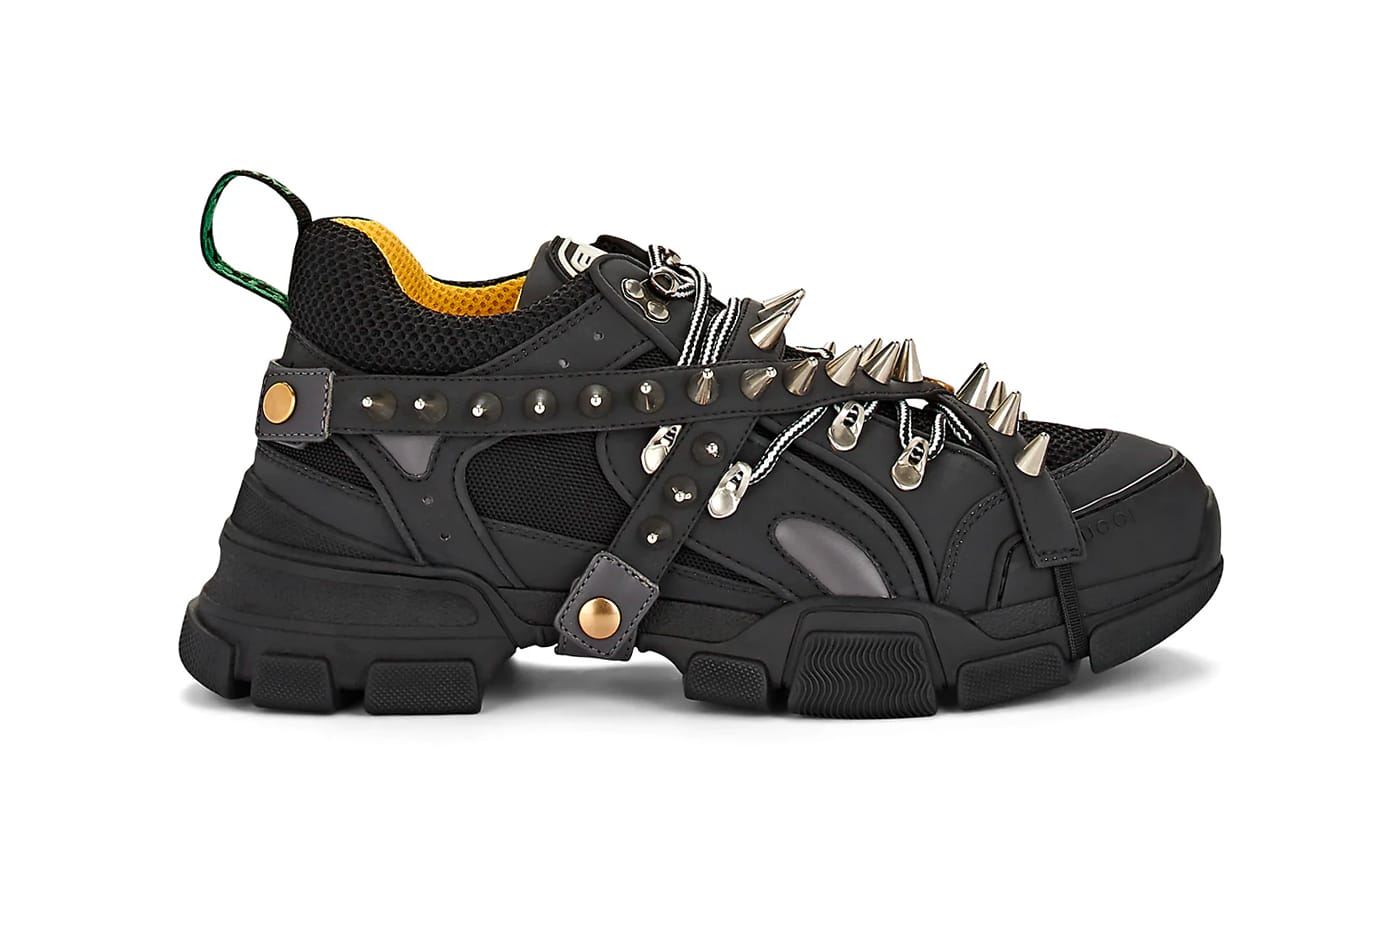 Gucci Flashtrek Spiked Canvas Sneakers 